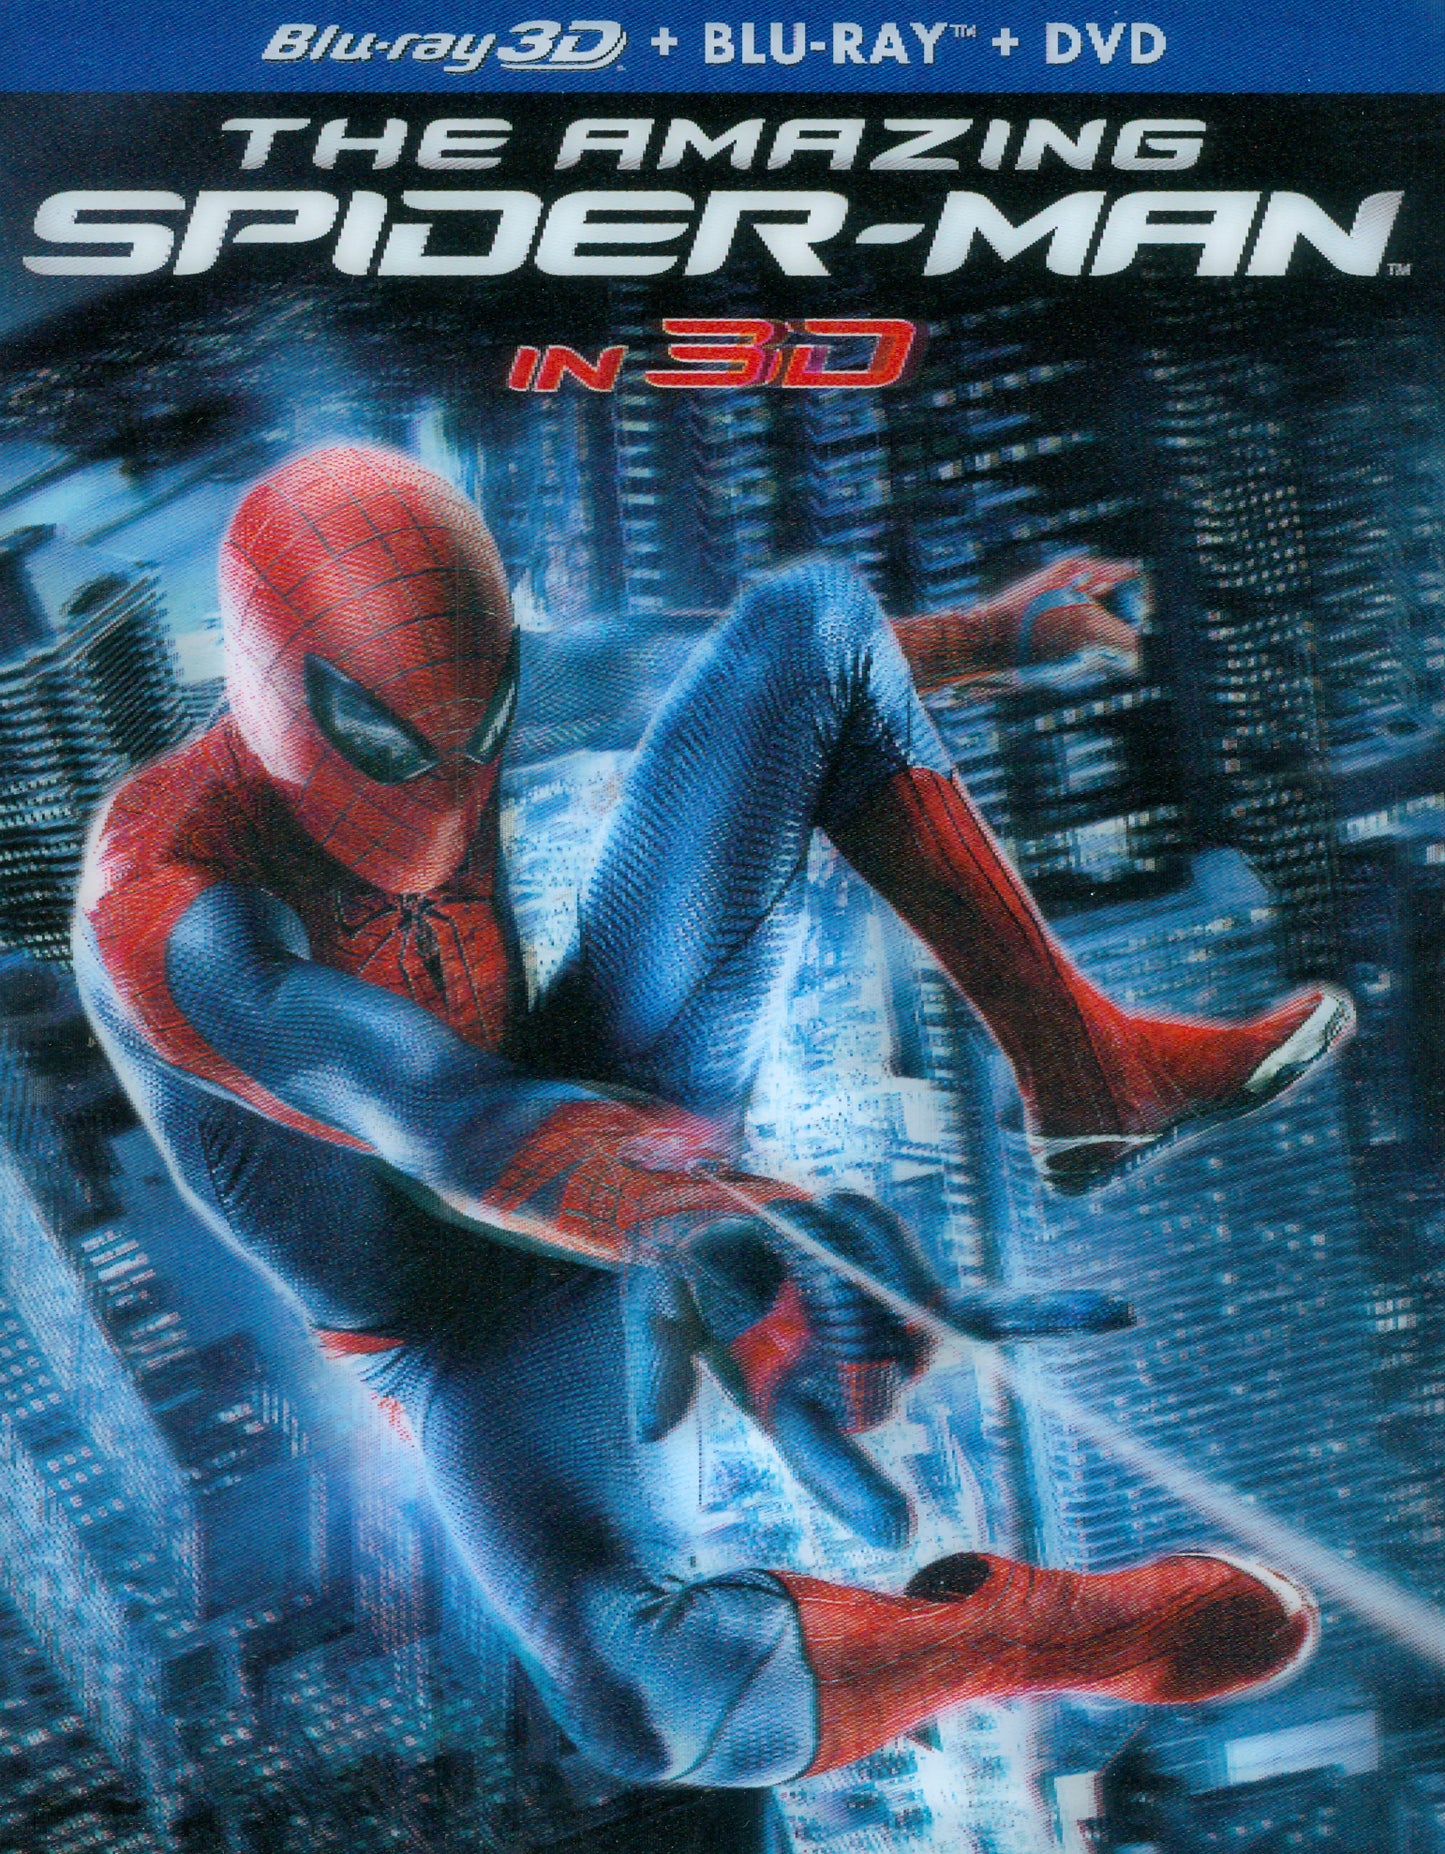 Amazing Spider-Man [4 Discs] [Includes Digital Copy] [3D] [Blu-ray/DVD] cover art